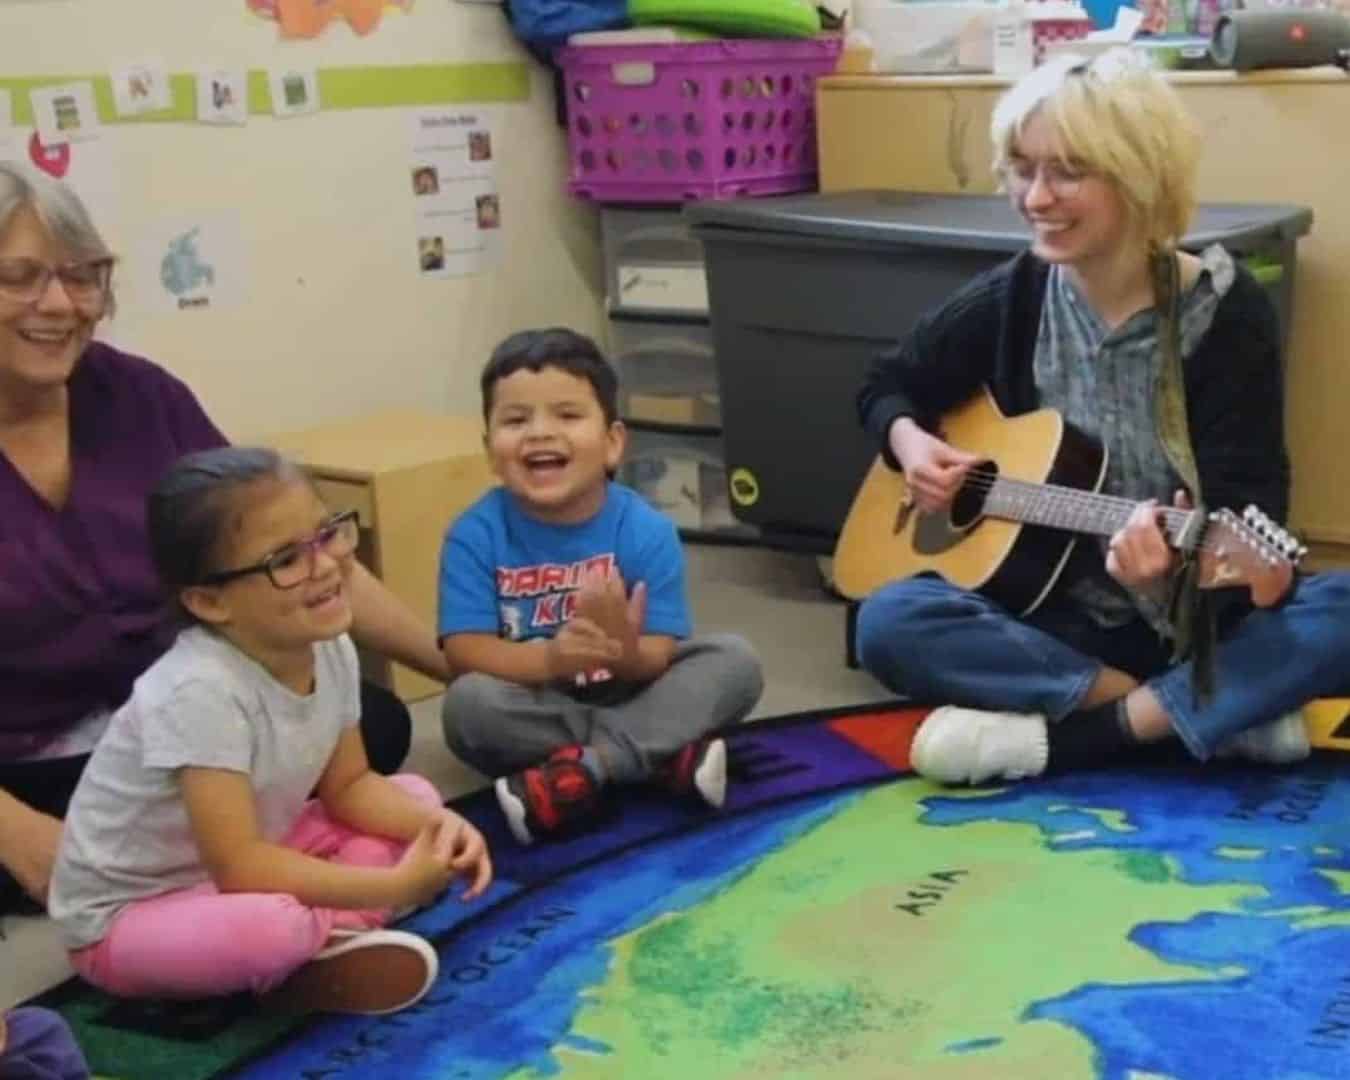 A woman with short blonde hair and glasses smiles while playing the guitar and singing, seated on a floor with two preschoolers and their teacher at a Little Swallows music class presented by Swallow Hill Music in Denver.